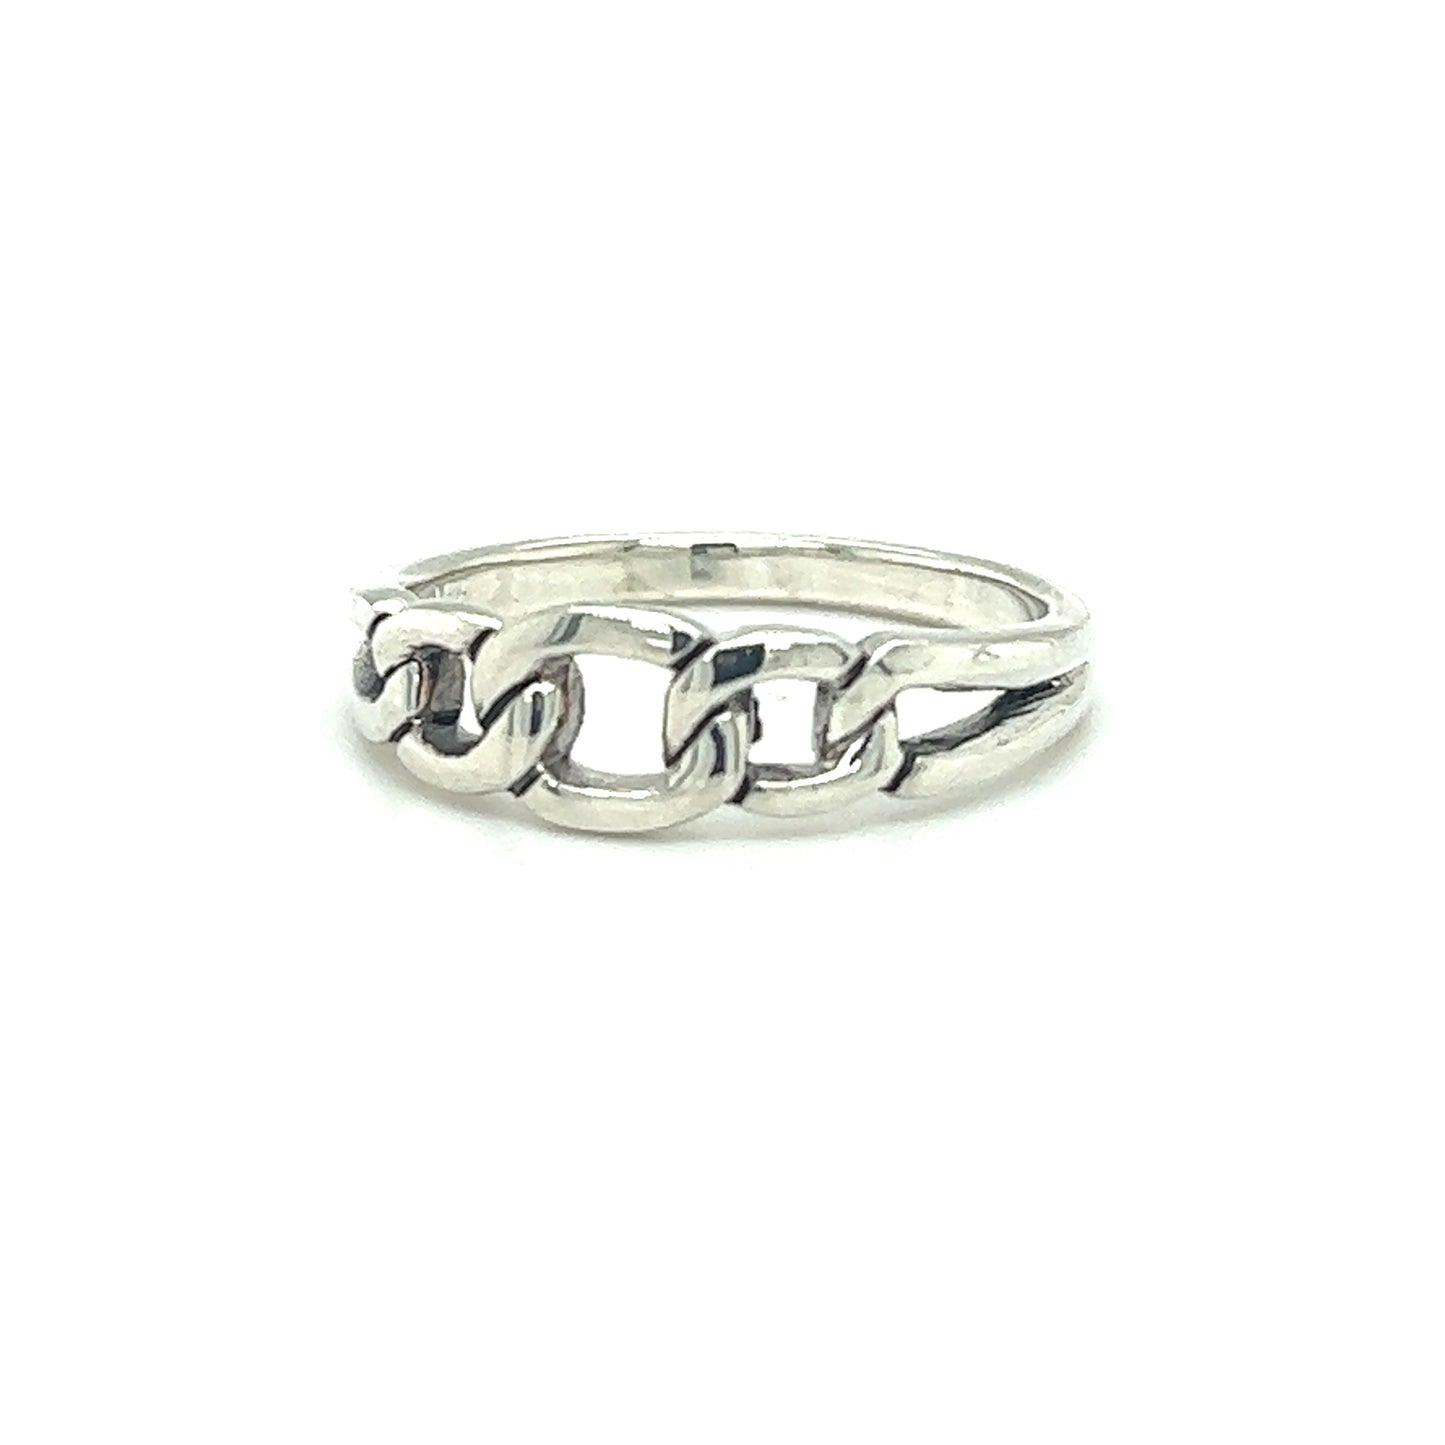 A Triple Chain Link Ring from Super Silver, with a symbolic meaning, representing interconnectedness, featuring a delicate silver chain link.